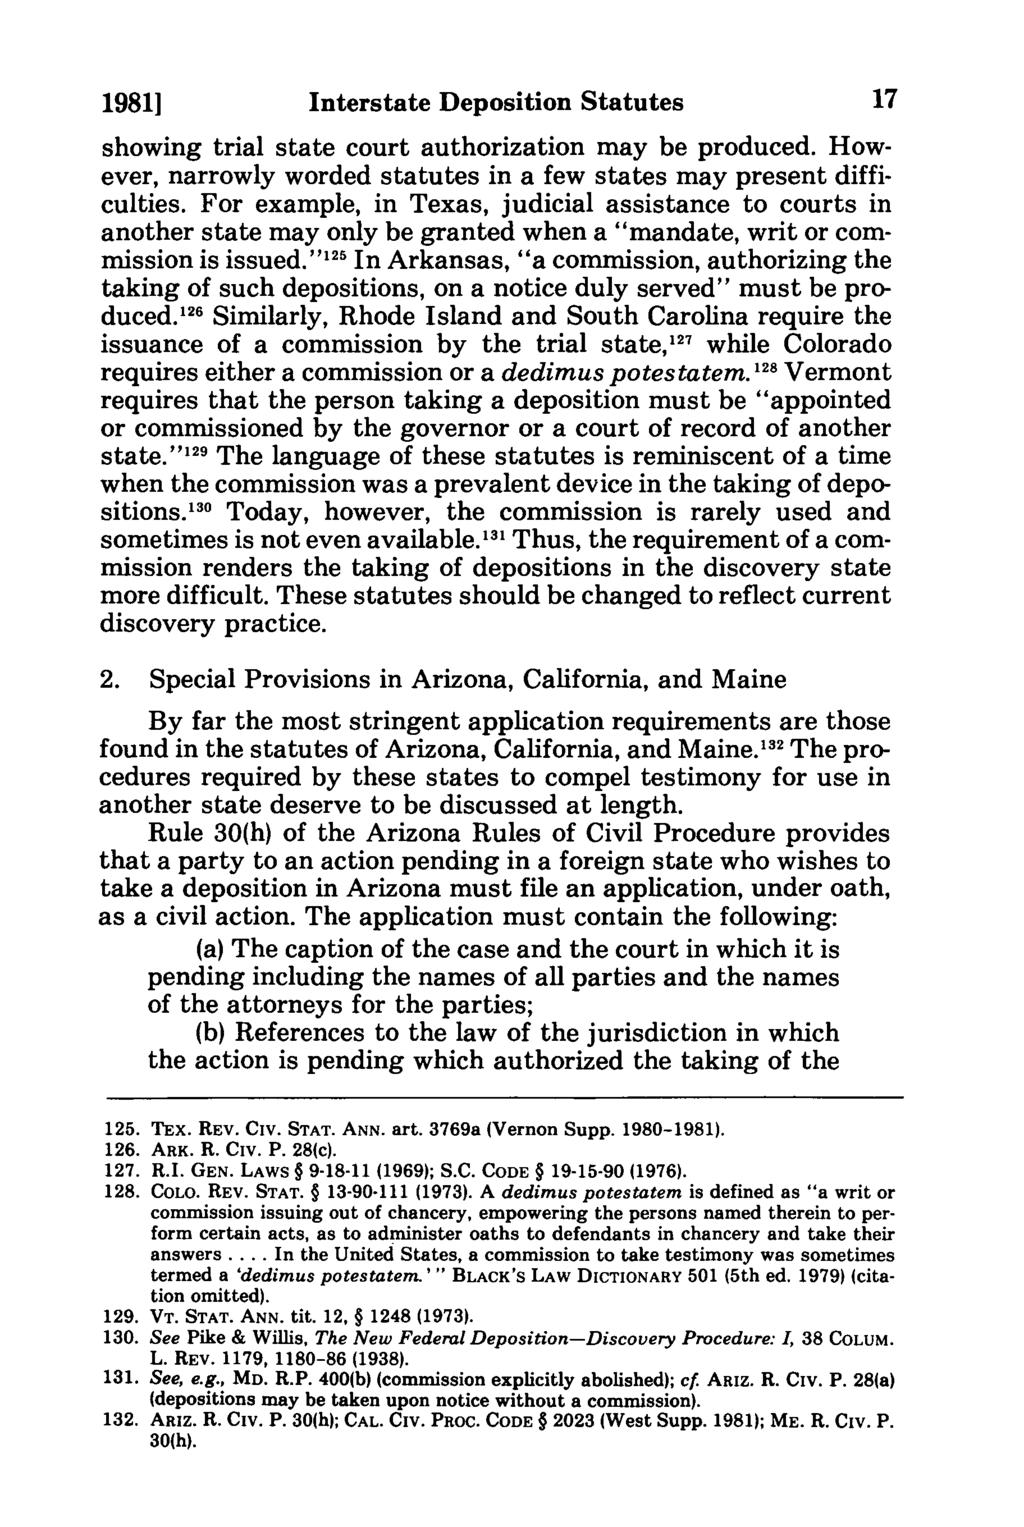 1981] Interstate Deposition Statutes showing trial state court authorization may be produced. However, narrowly worded statutes in a few states may present difficulties.